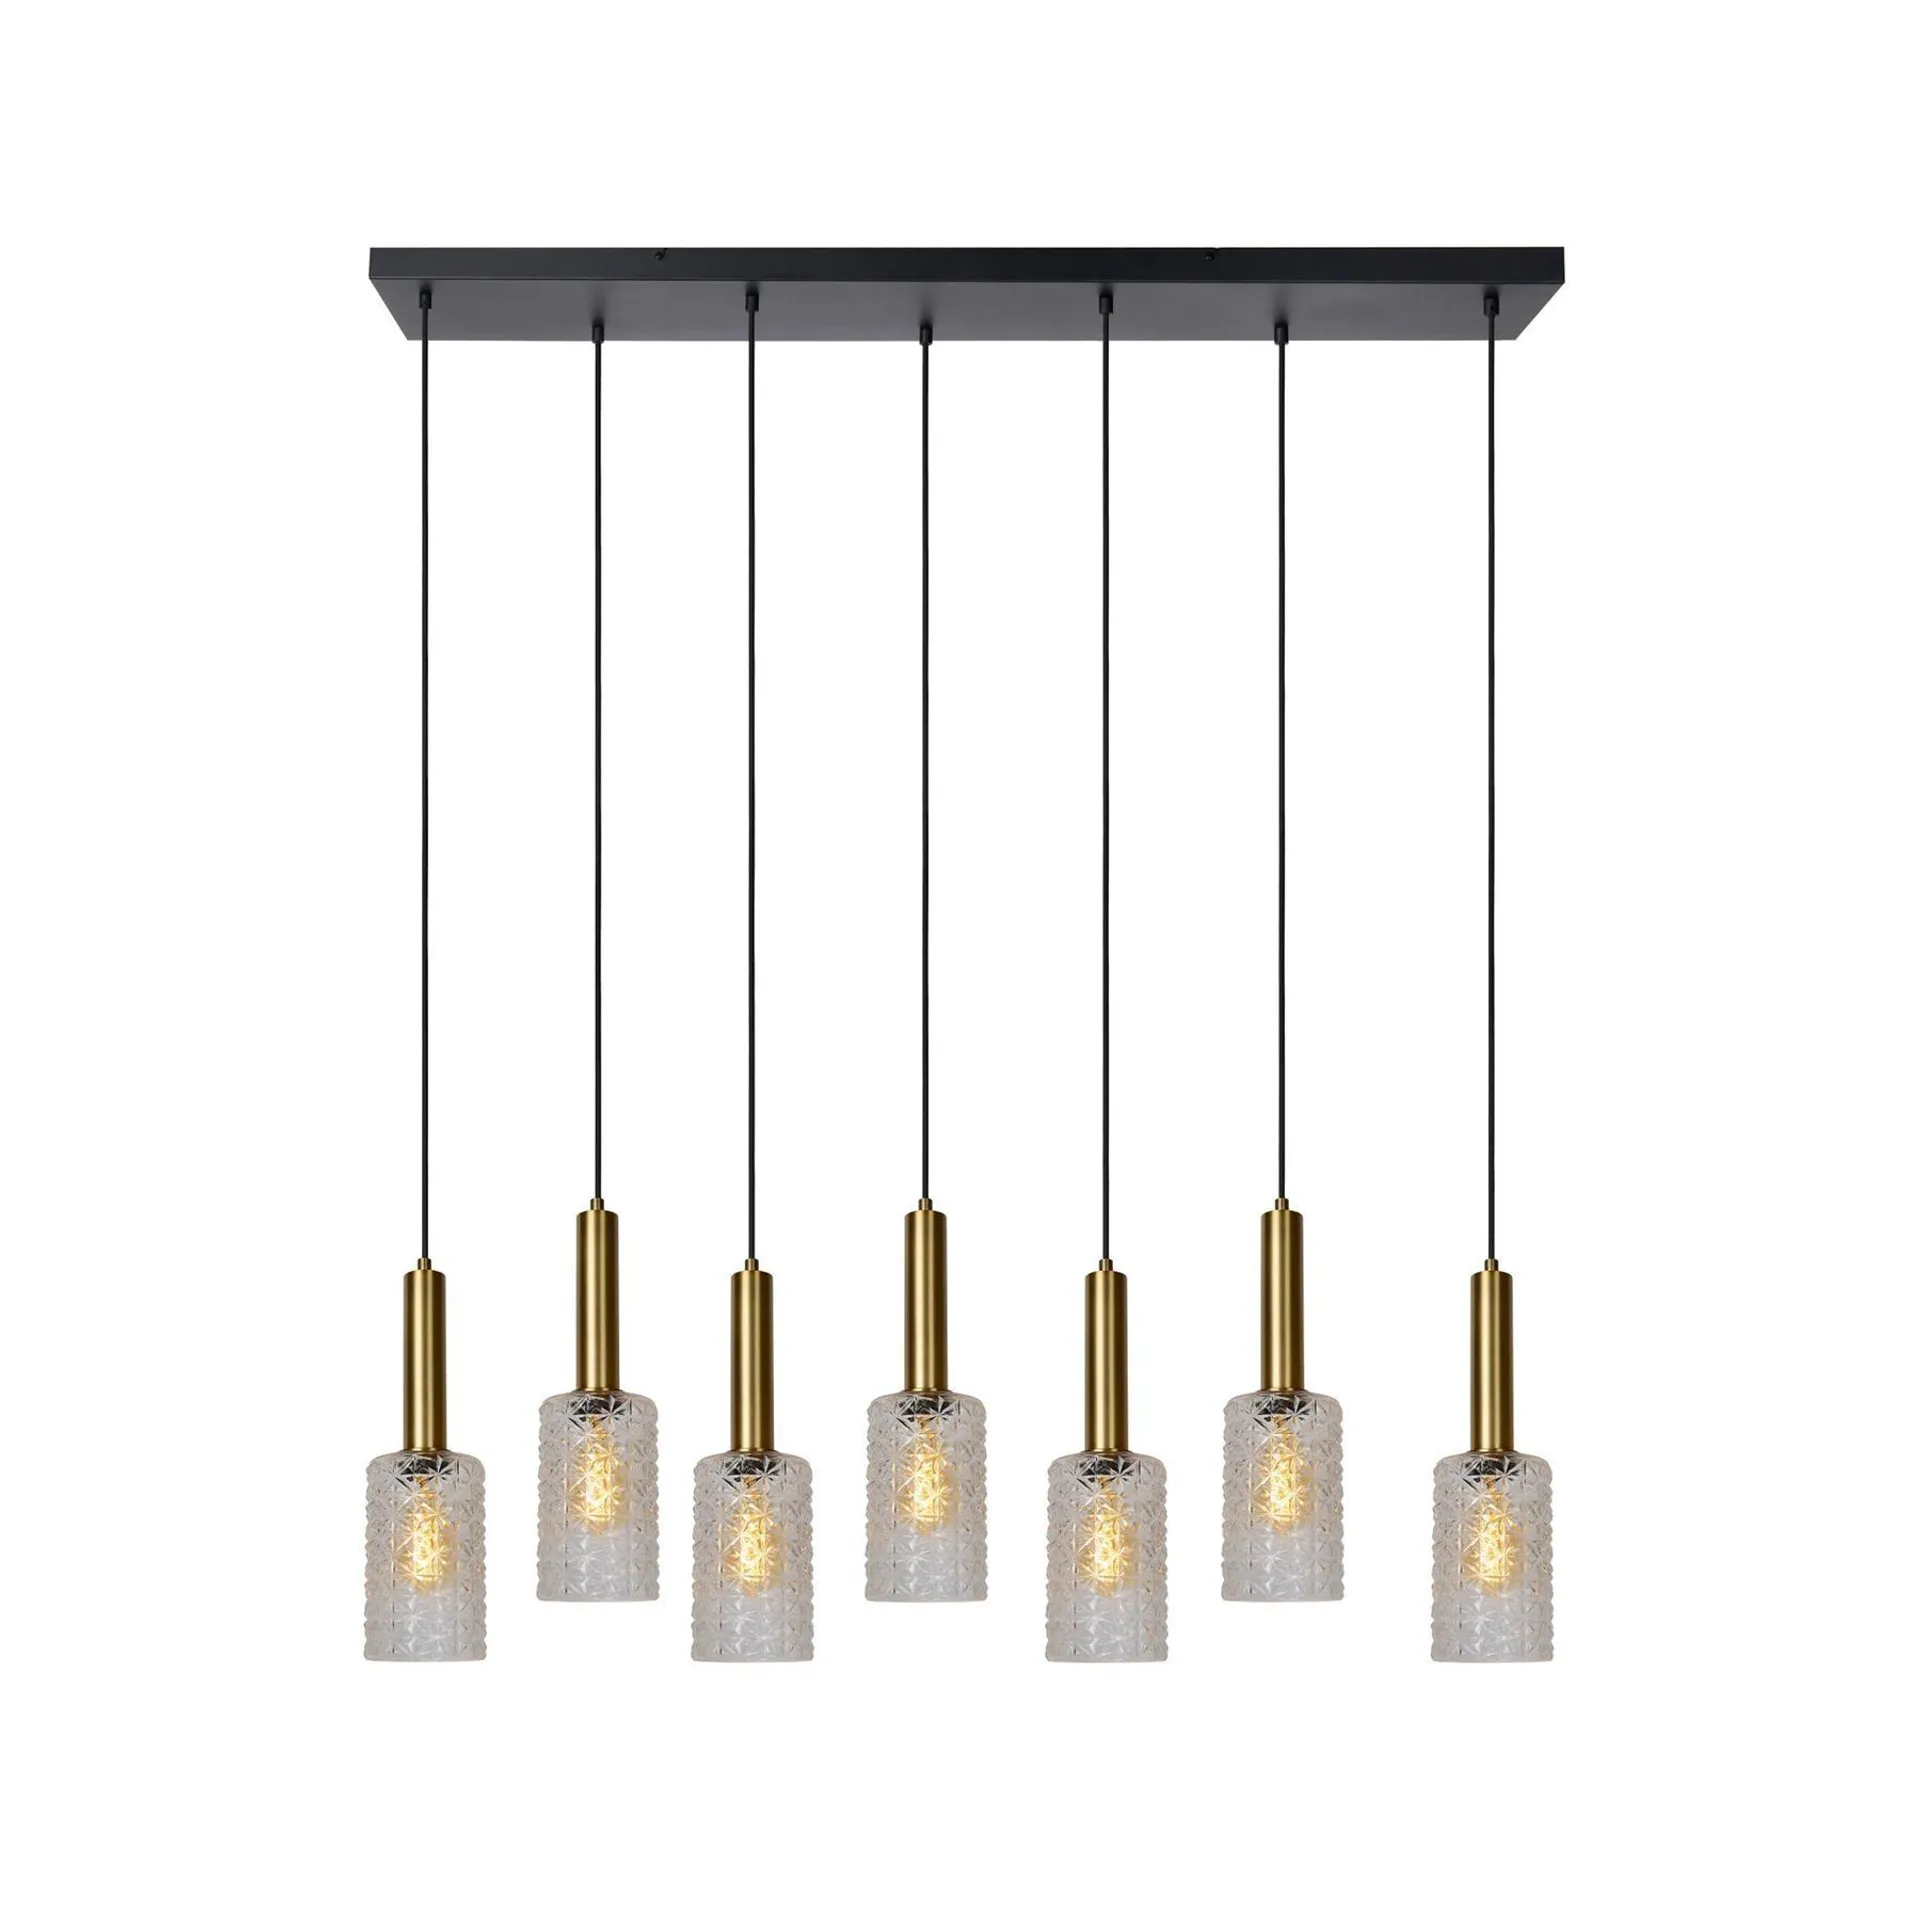 Lucide CORALIE Hanglamp 7xE27 - Transparant